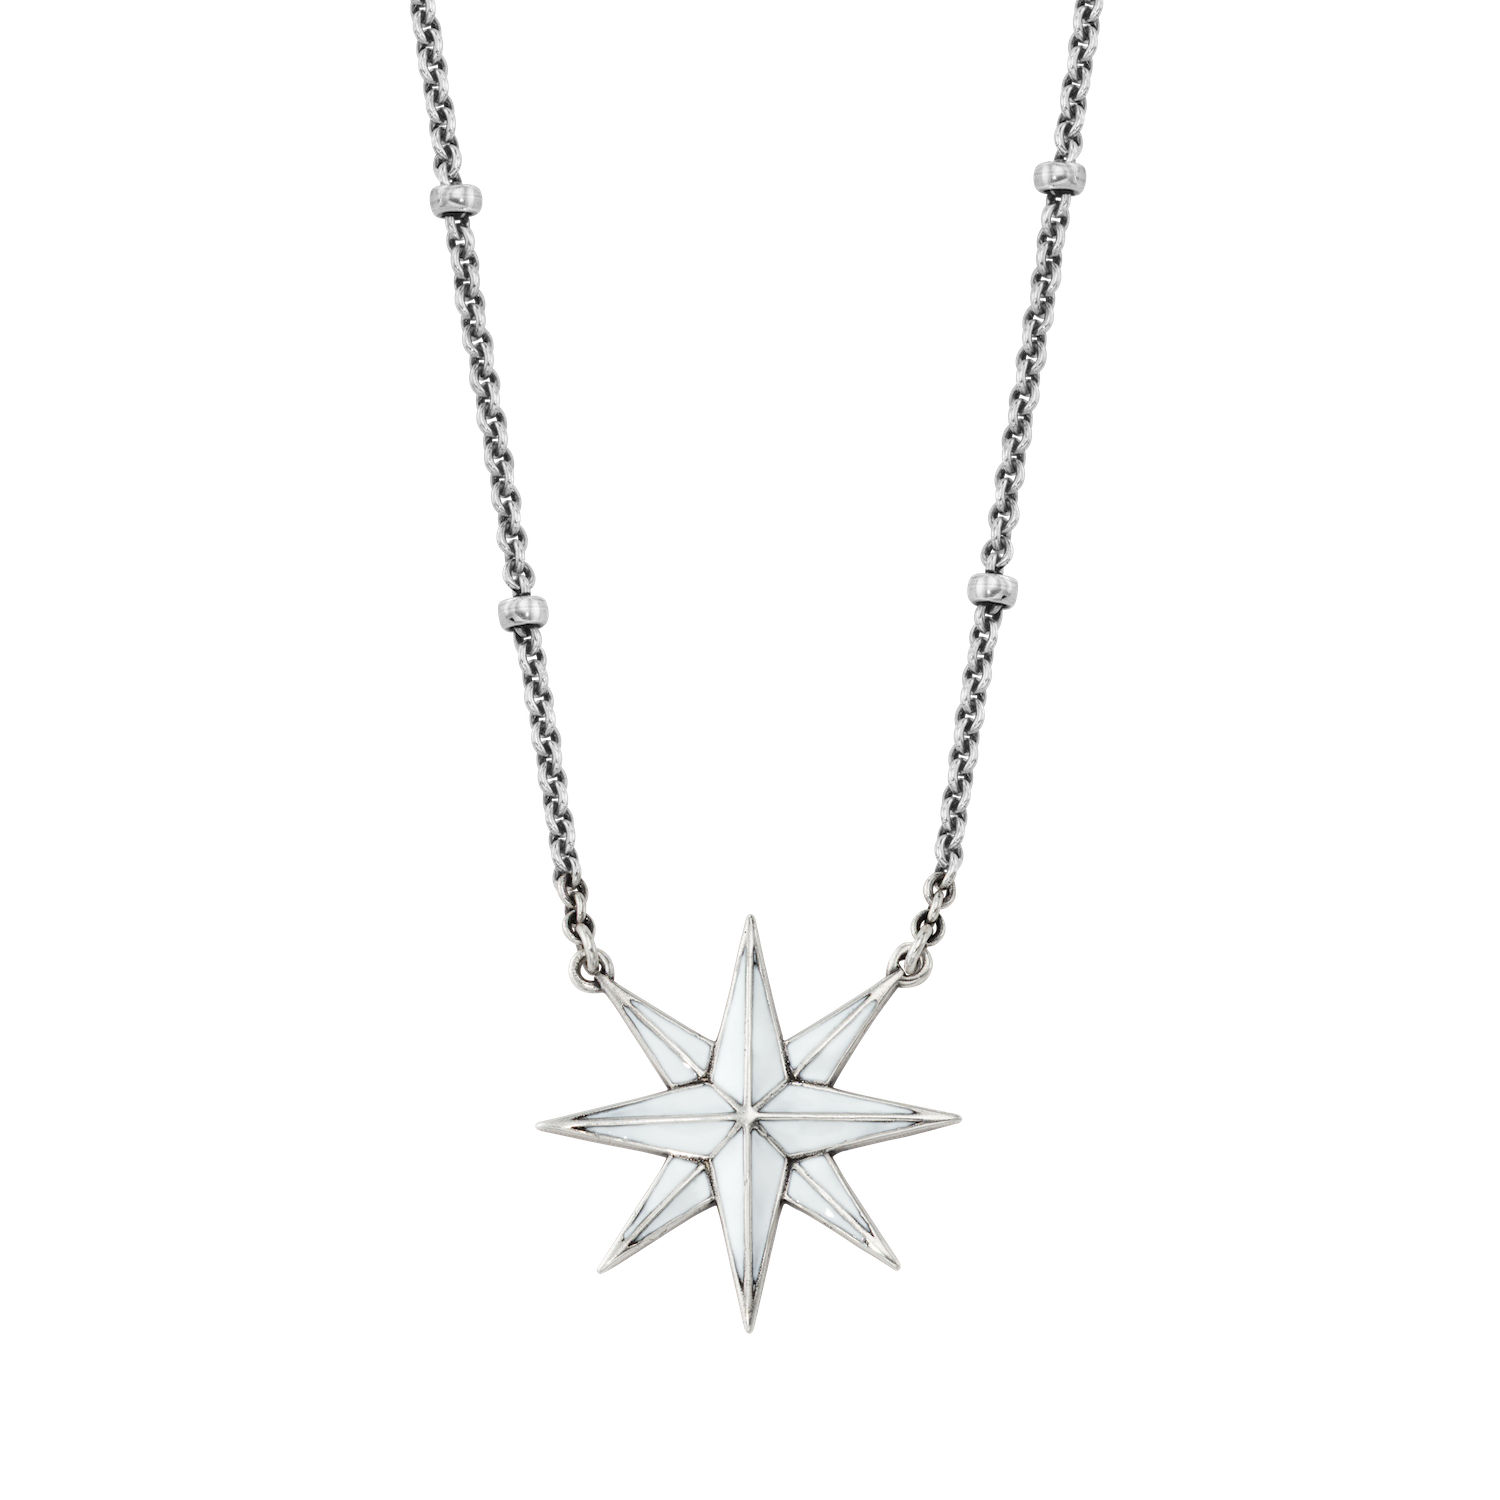 Star Enamel Necklace | Fine jewelry solid silver gold-finish necklaces ...